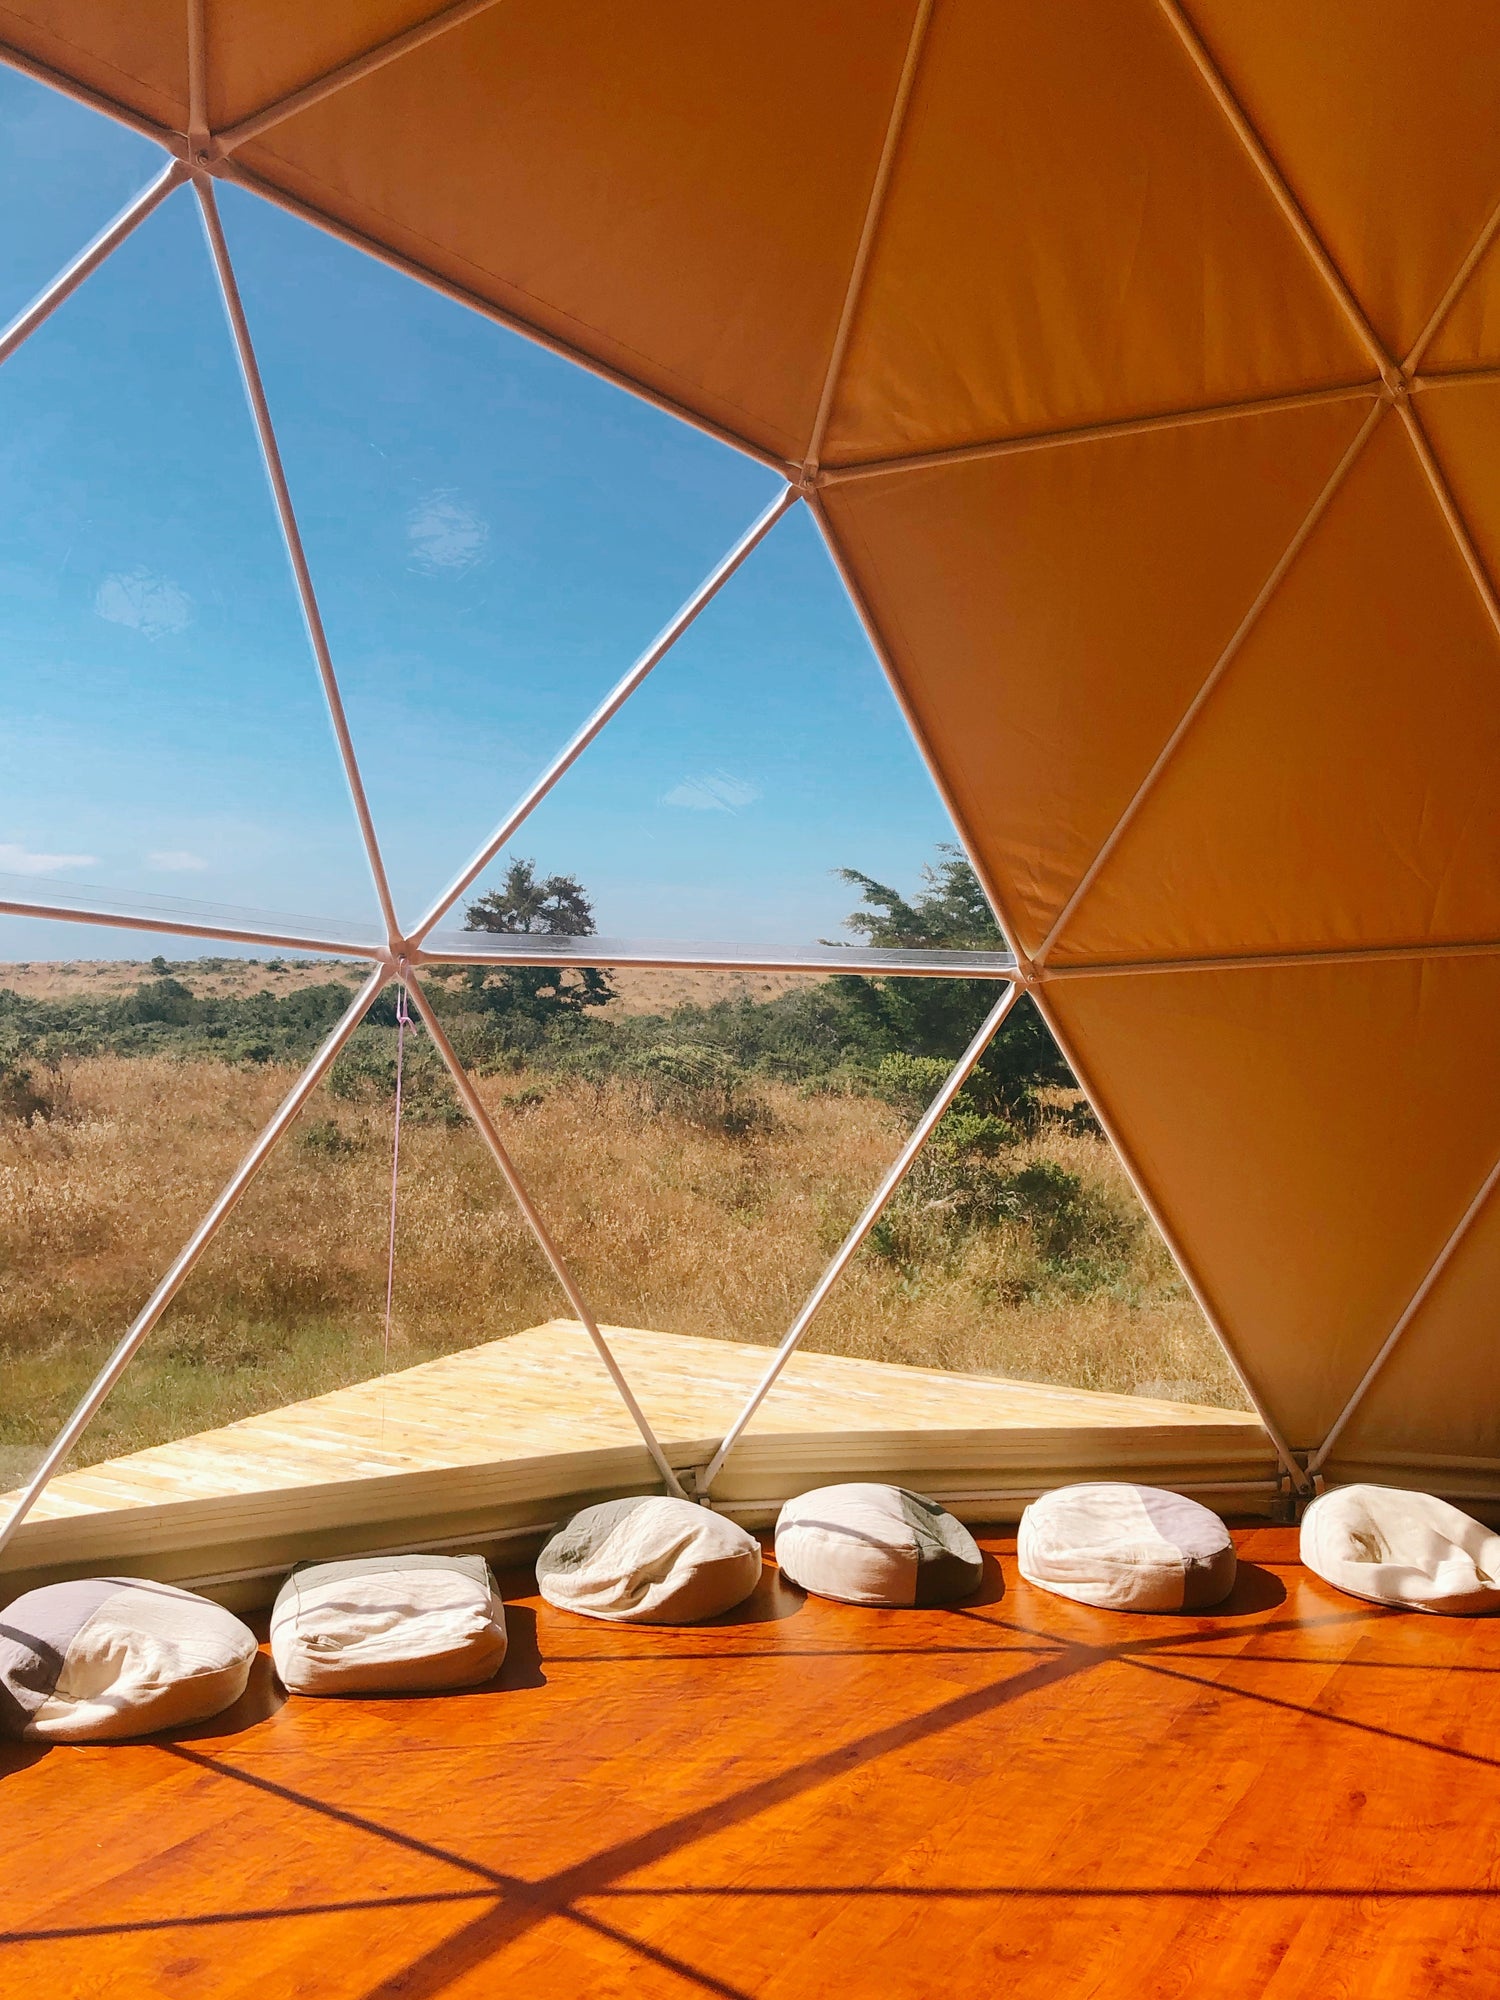 Geodesic Dome Tent Kit, Geodesic Dome Tent